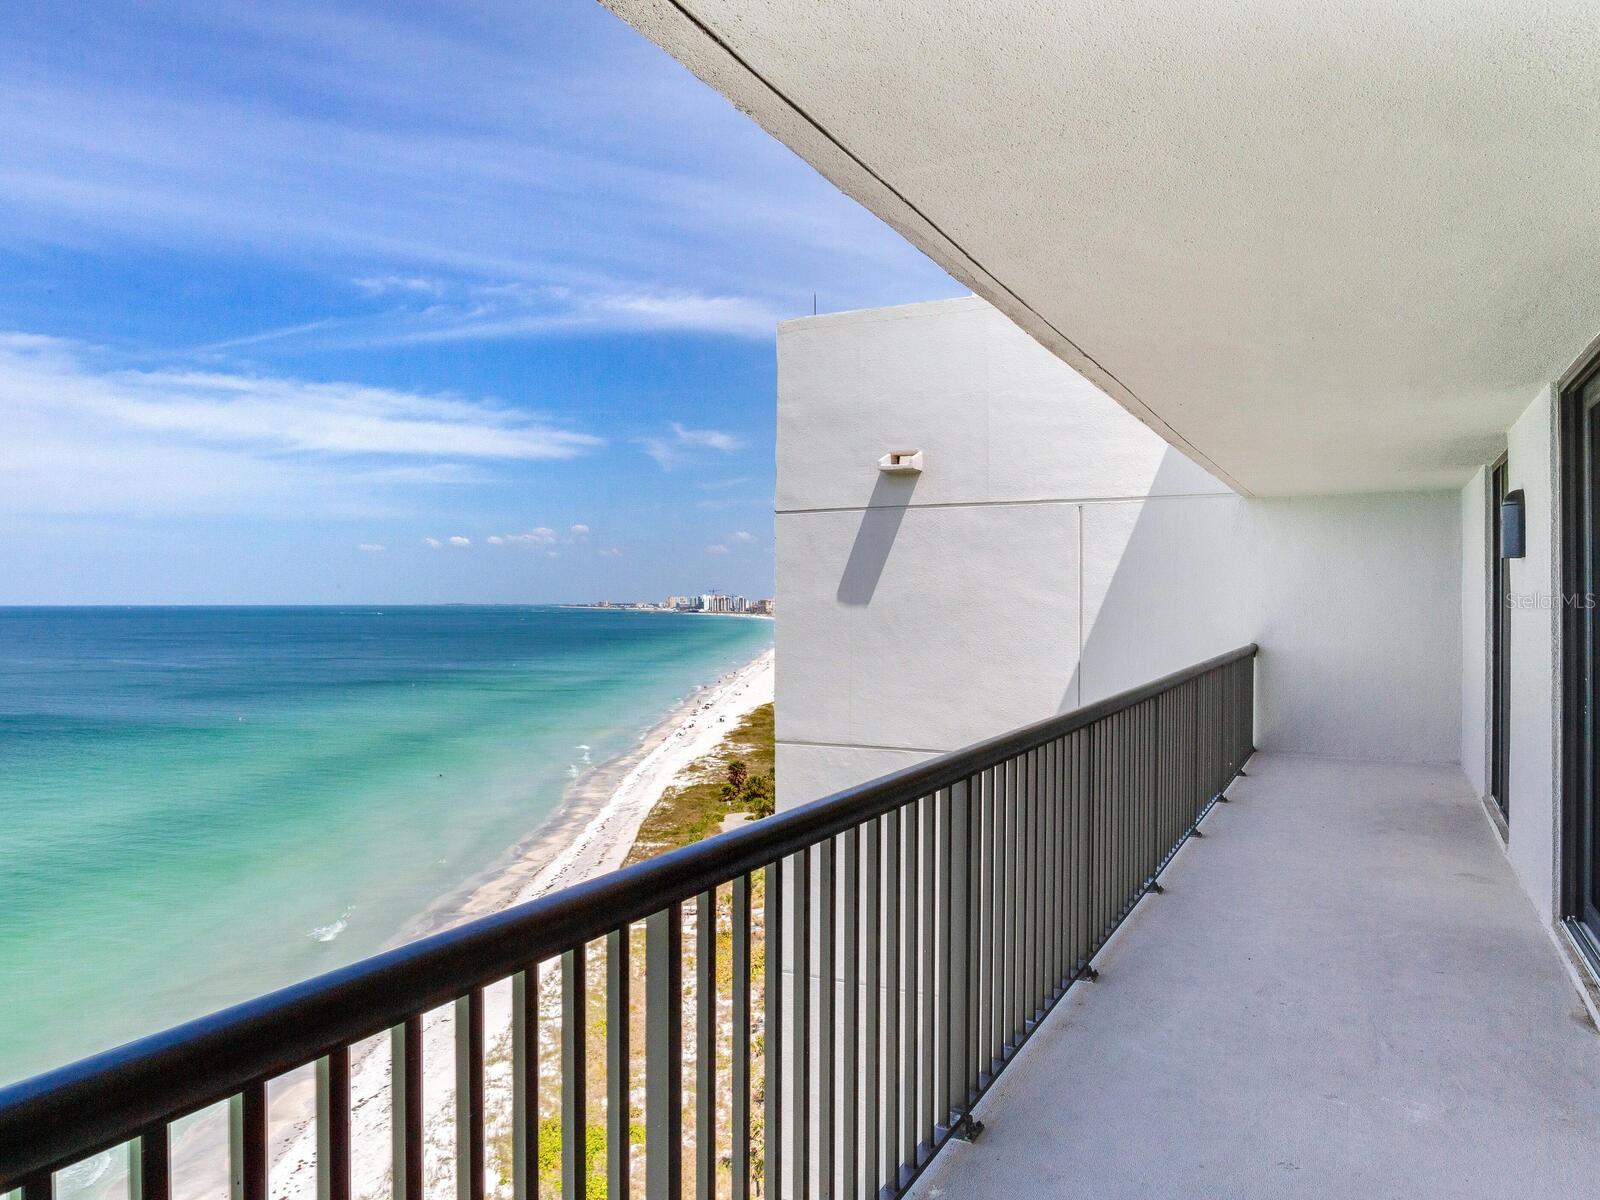 Endless views from this 144' long wrap around balcony